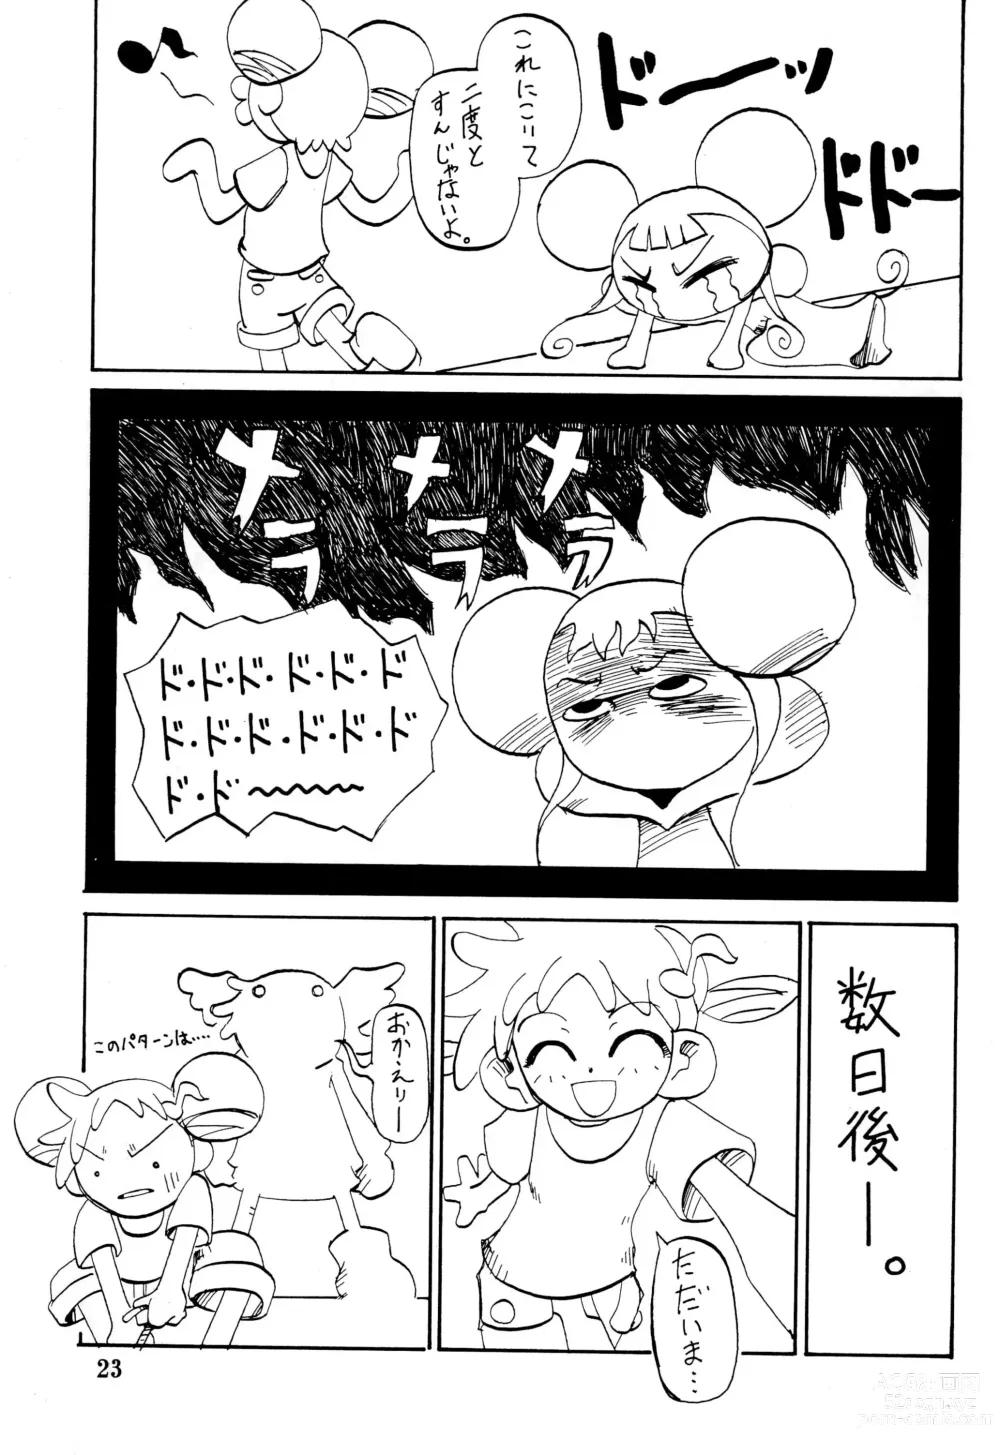 Page 23 of doujinshi Happy Lucky Magicalday